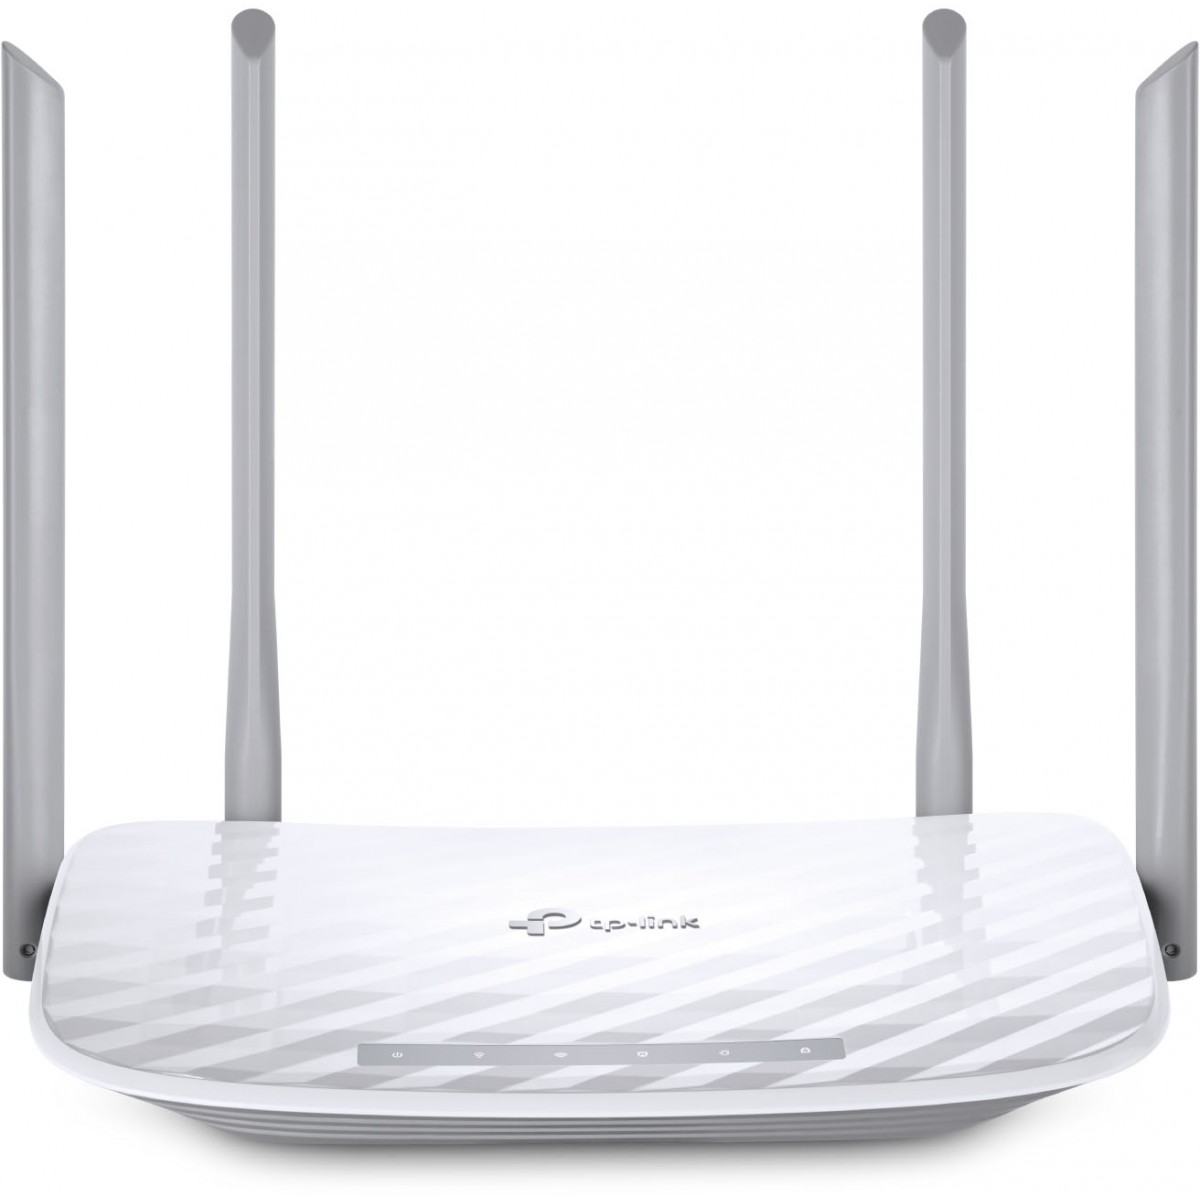 Roteador Wireless TP-LINK Archer C50 Dual-band Wireless AC1200 5GHz 867Mbps 802.11ac